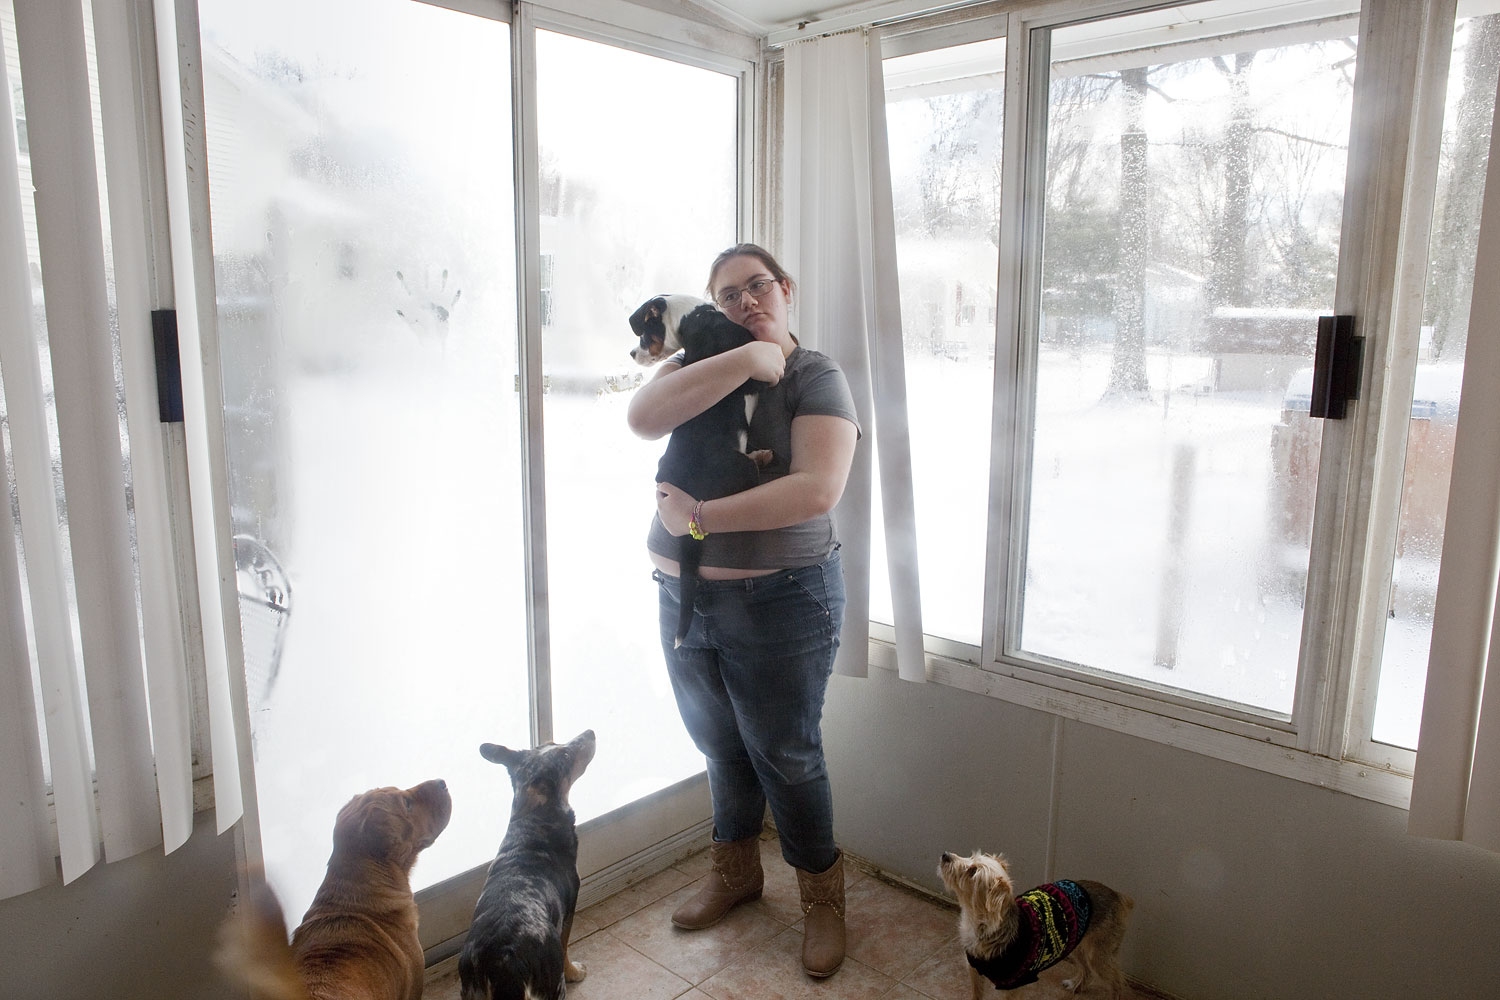 Kimberly Rhodes photographed Friday, January 3, 2014 at her family home in Boardman, Ohio (Katherine Wolkoff for TIME)